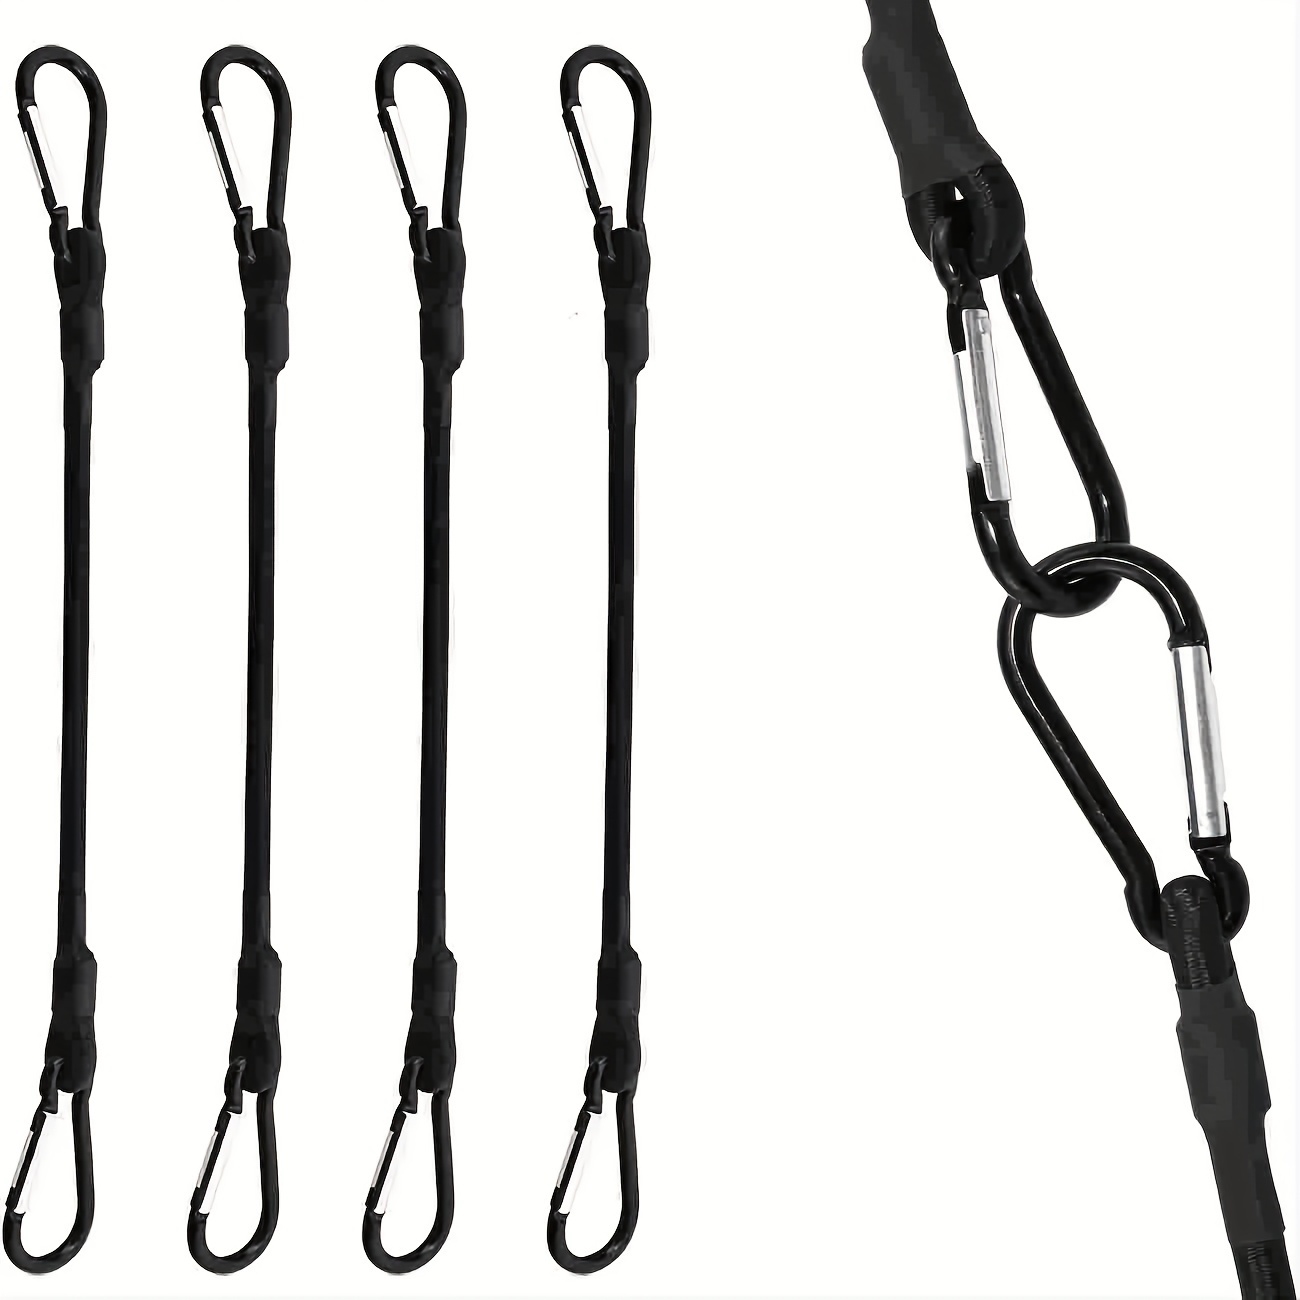 Mini Bungee Cords- 10 Pack of 1/4 (6mm) x 12 Black Bungy Cord